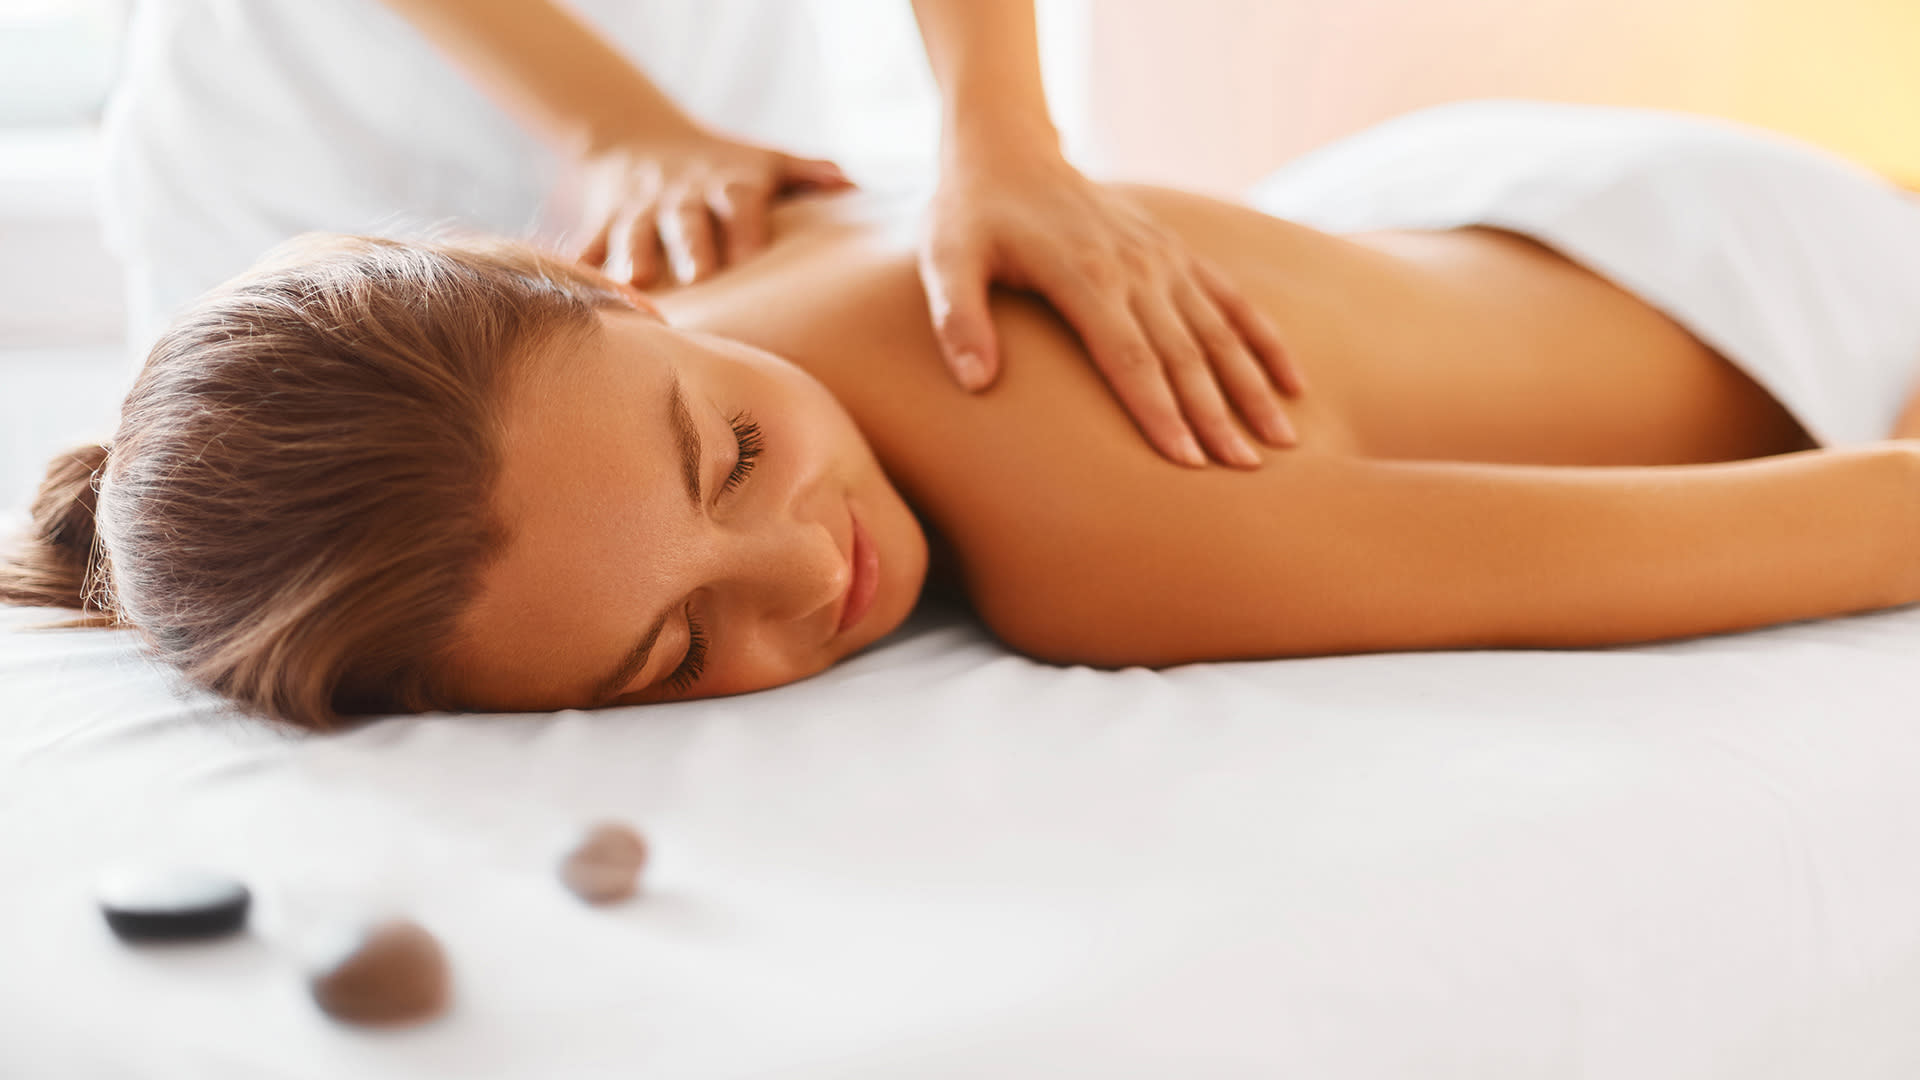 spa treatments and amenities in greater palm springs